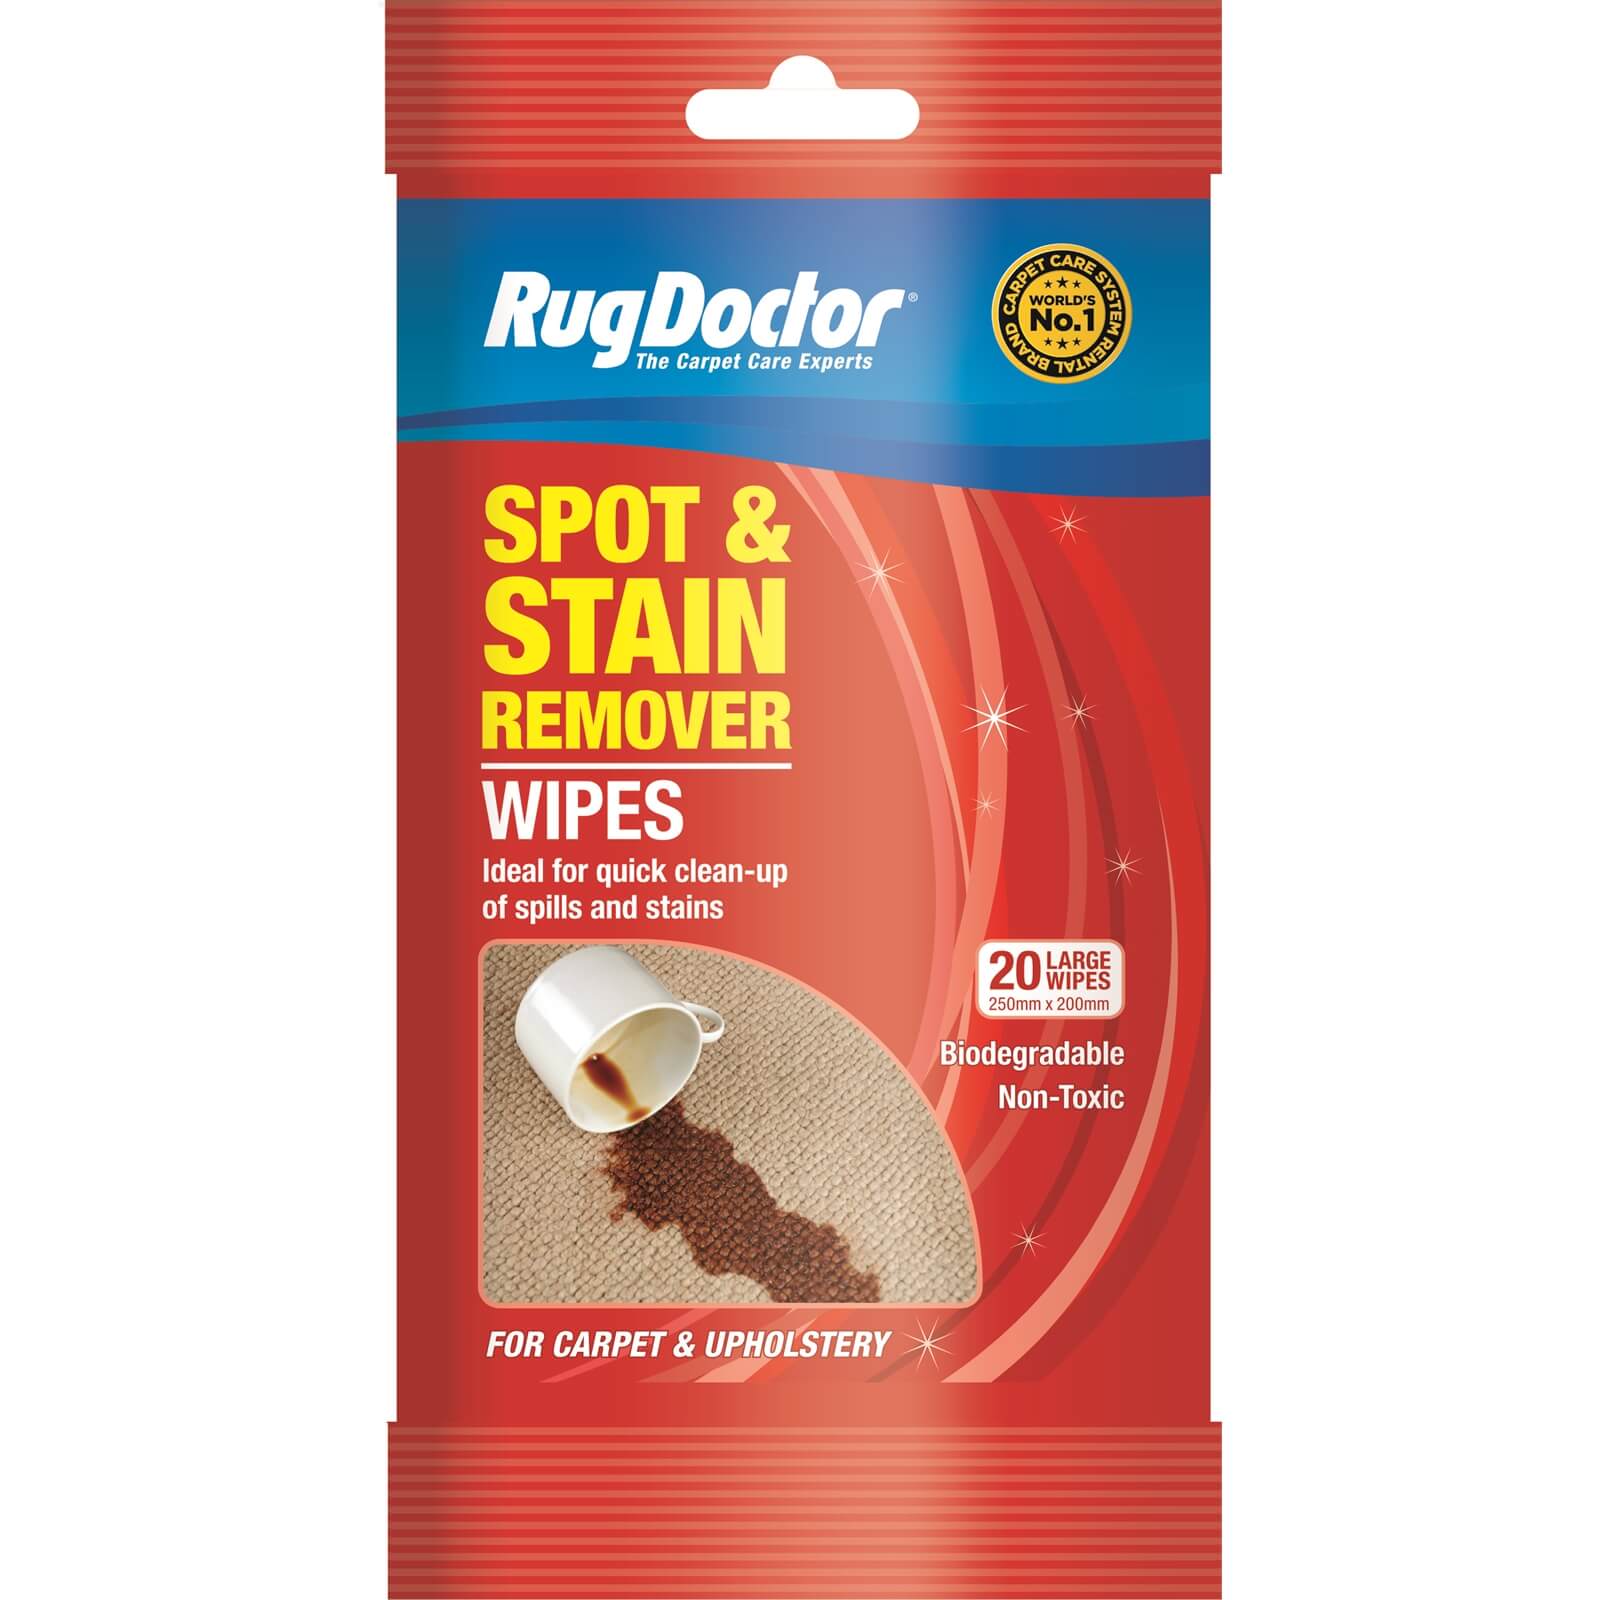 Rug Doctor Spot & Stain Remover Wipes